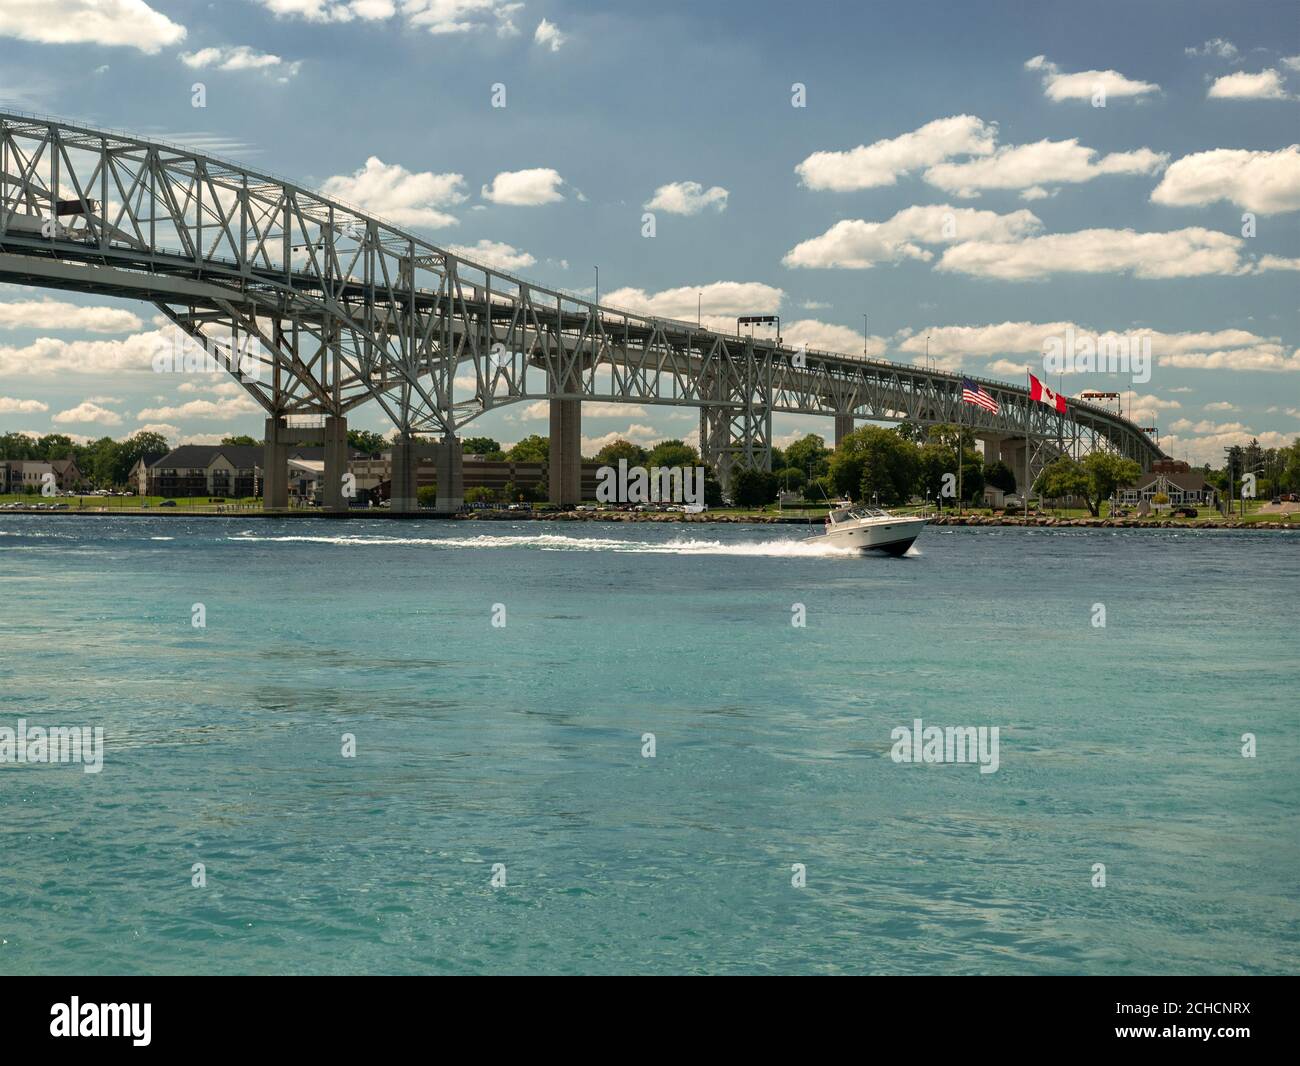 The Blue Water Bridge Spanning The St Clair River In Sarnia Ontario Canada The International Crossing Point On The Canadian U.S. Border Stock Photo